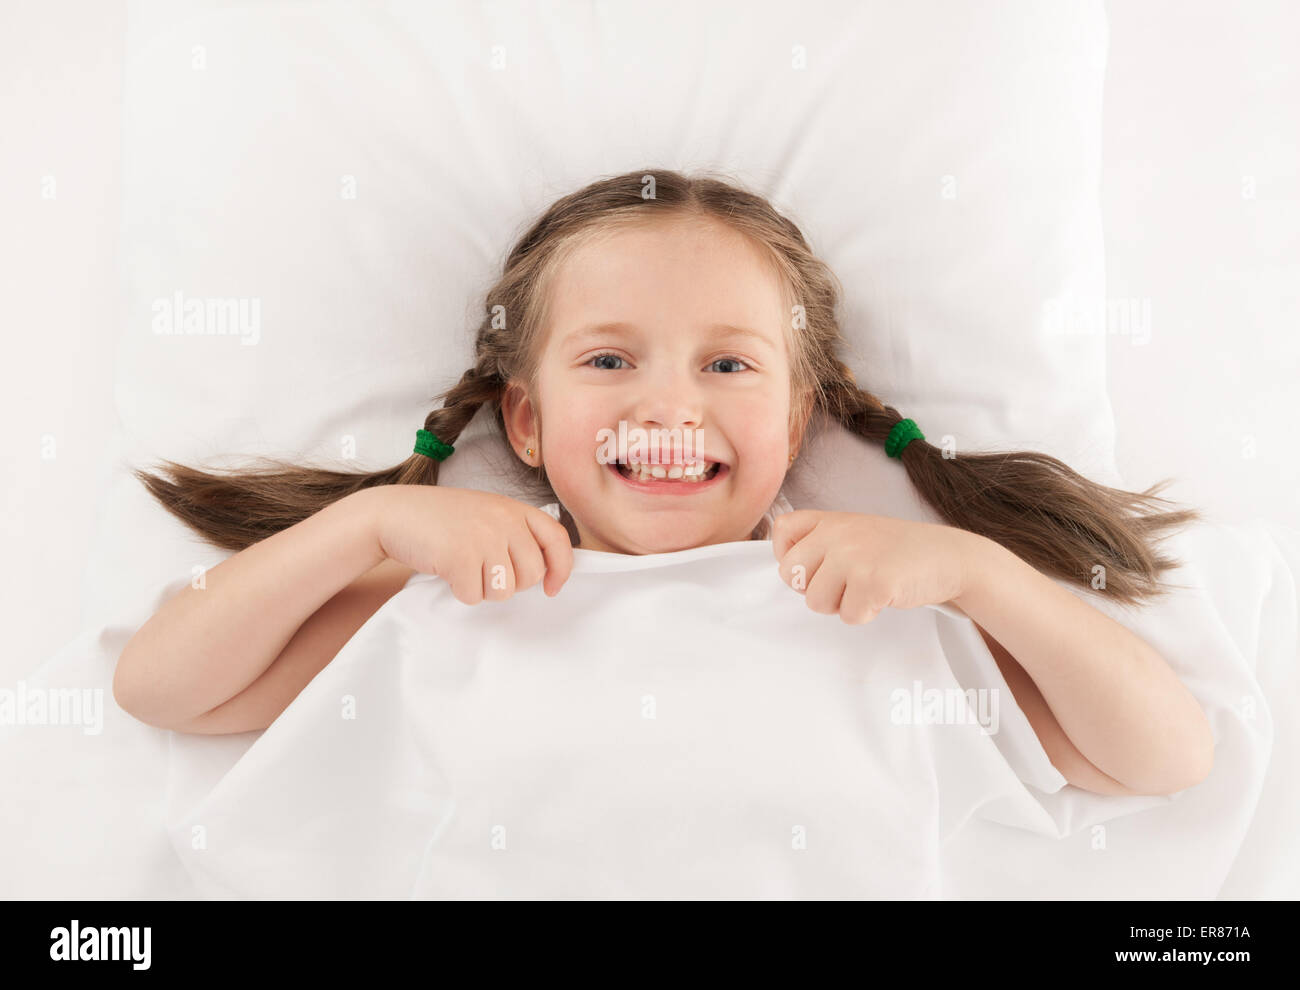 girl lying in bed on white Stock Photo